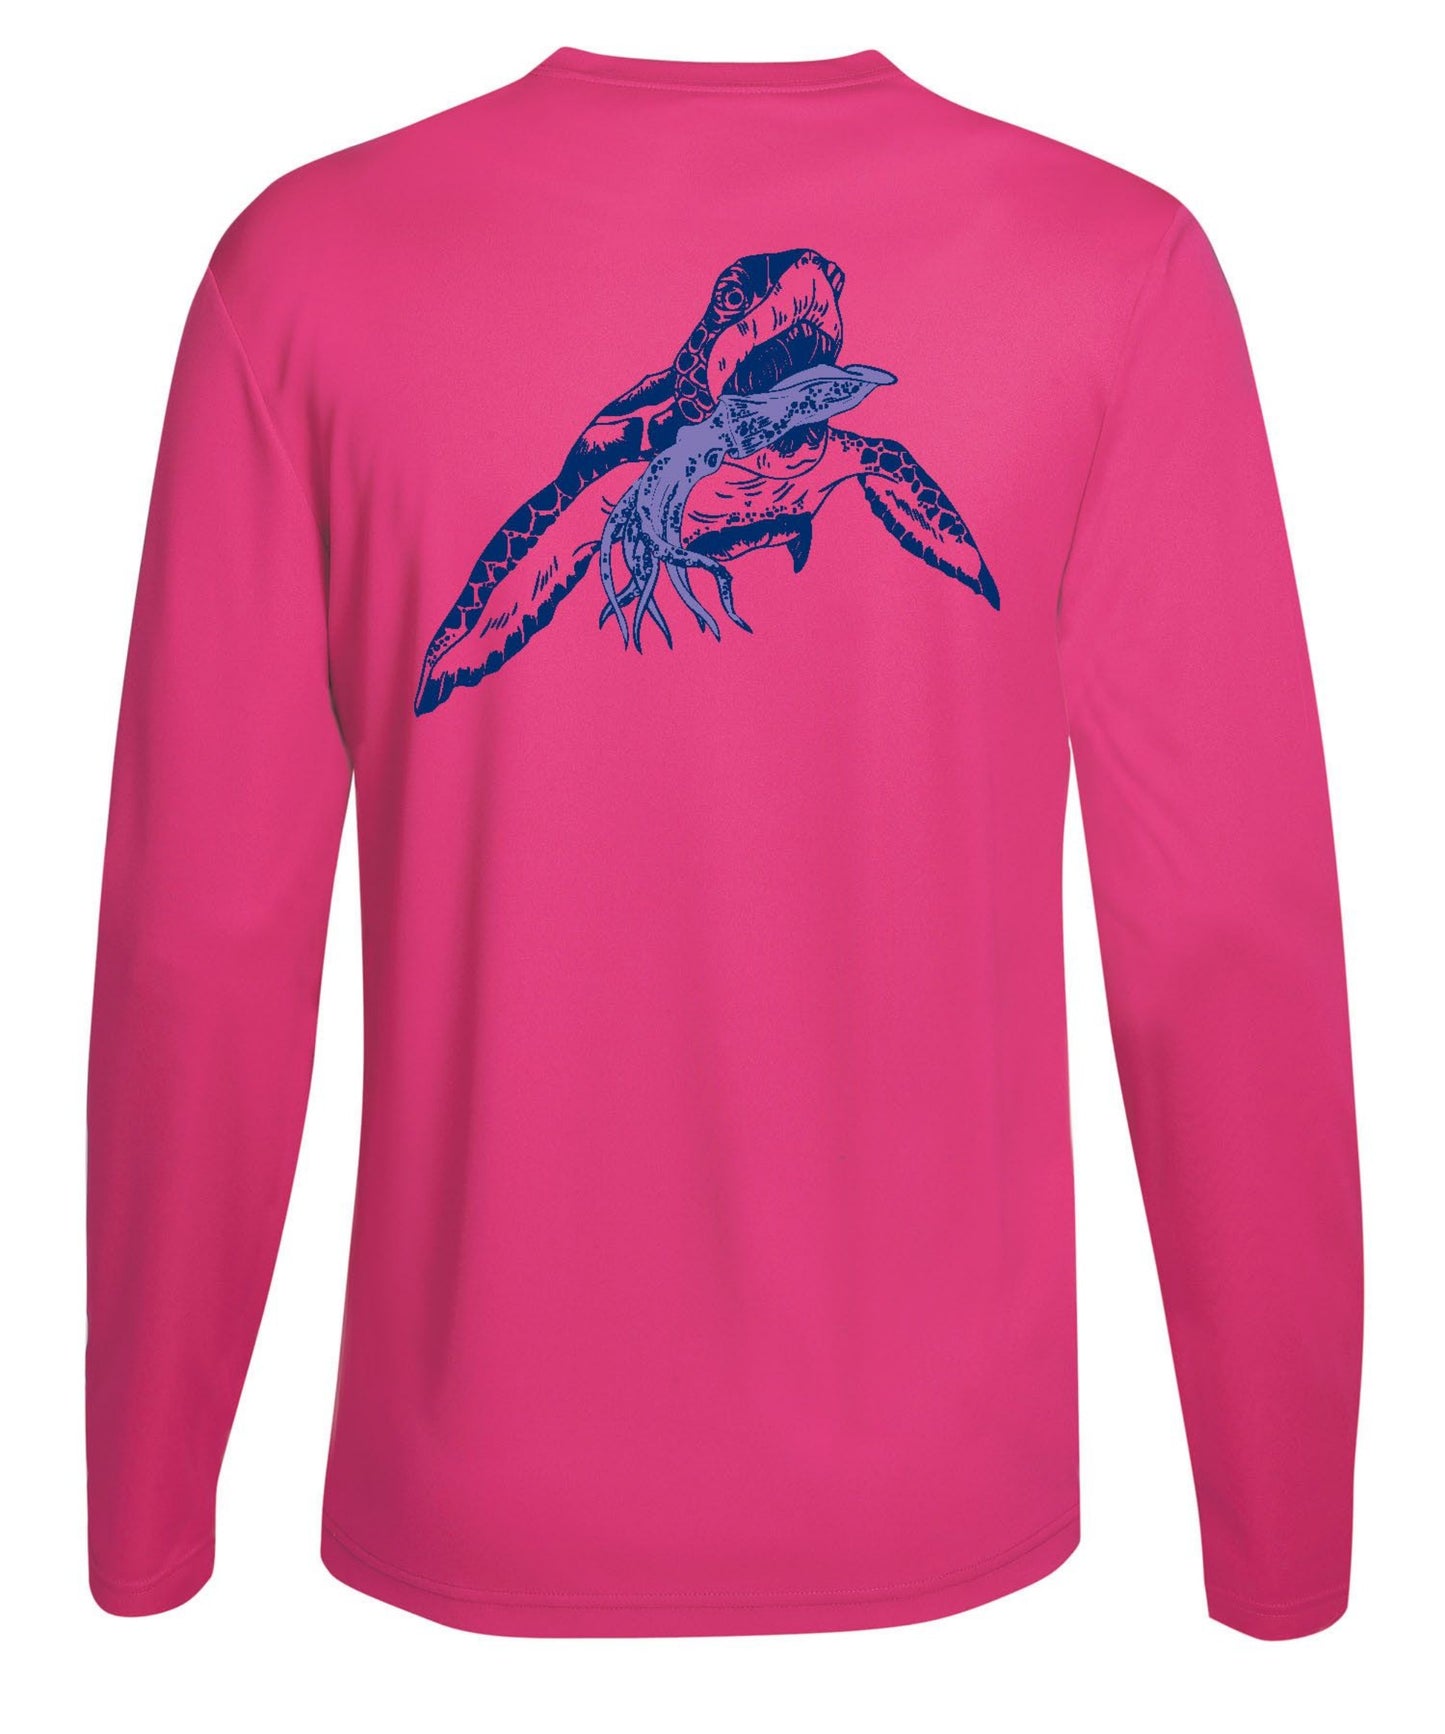 Yellow Turtle Long Sleeve Dri Fit Shirts For Men. Shirts With Sun